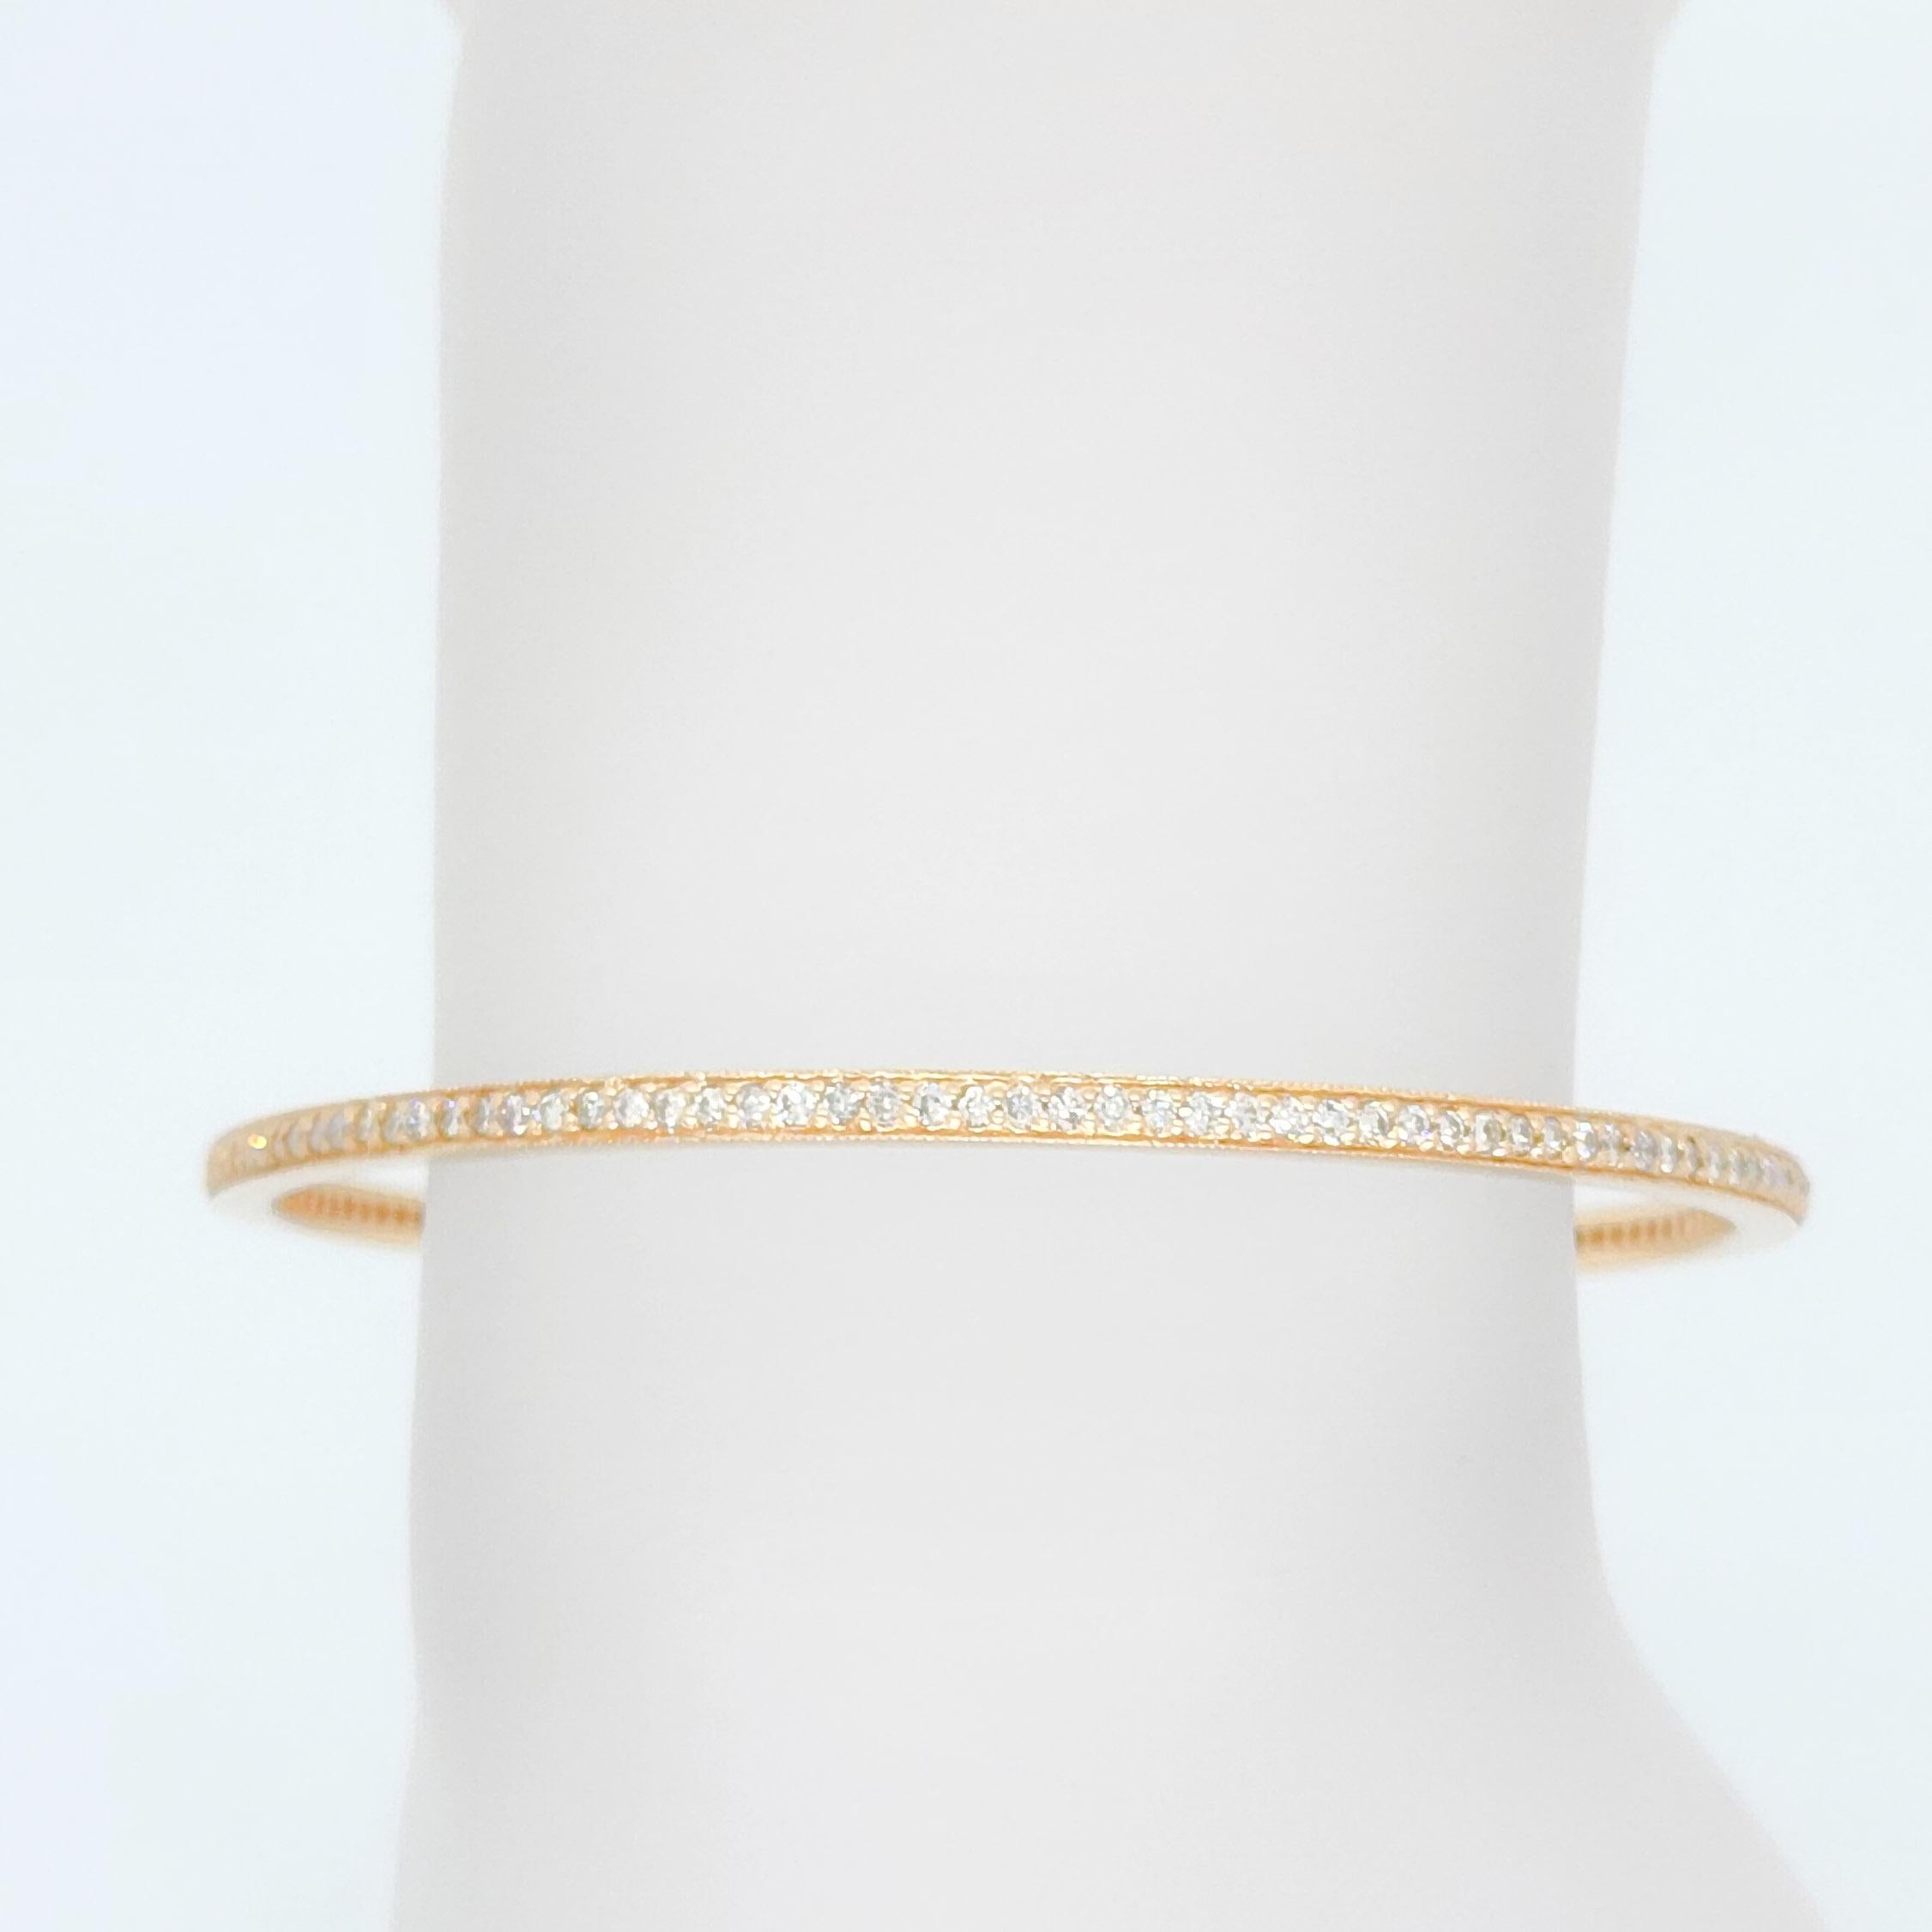 Beautiful 2.25 ct. white diamond rounds in this handmade 14k rose gold bangle  Diamonds go all the way around the bangle.  Easy to stack or wear on it's own.